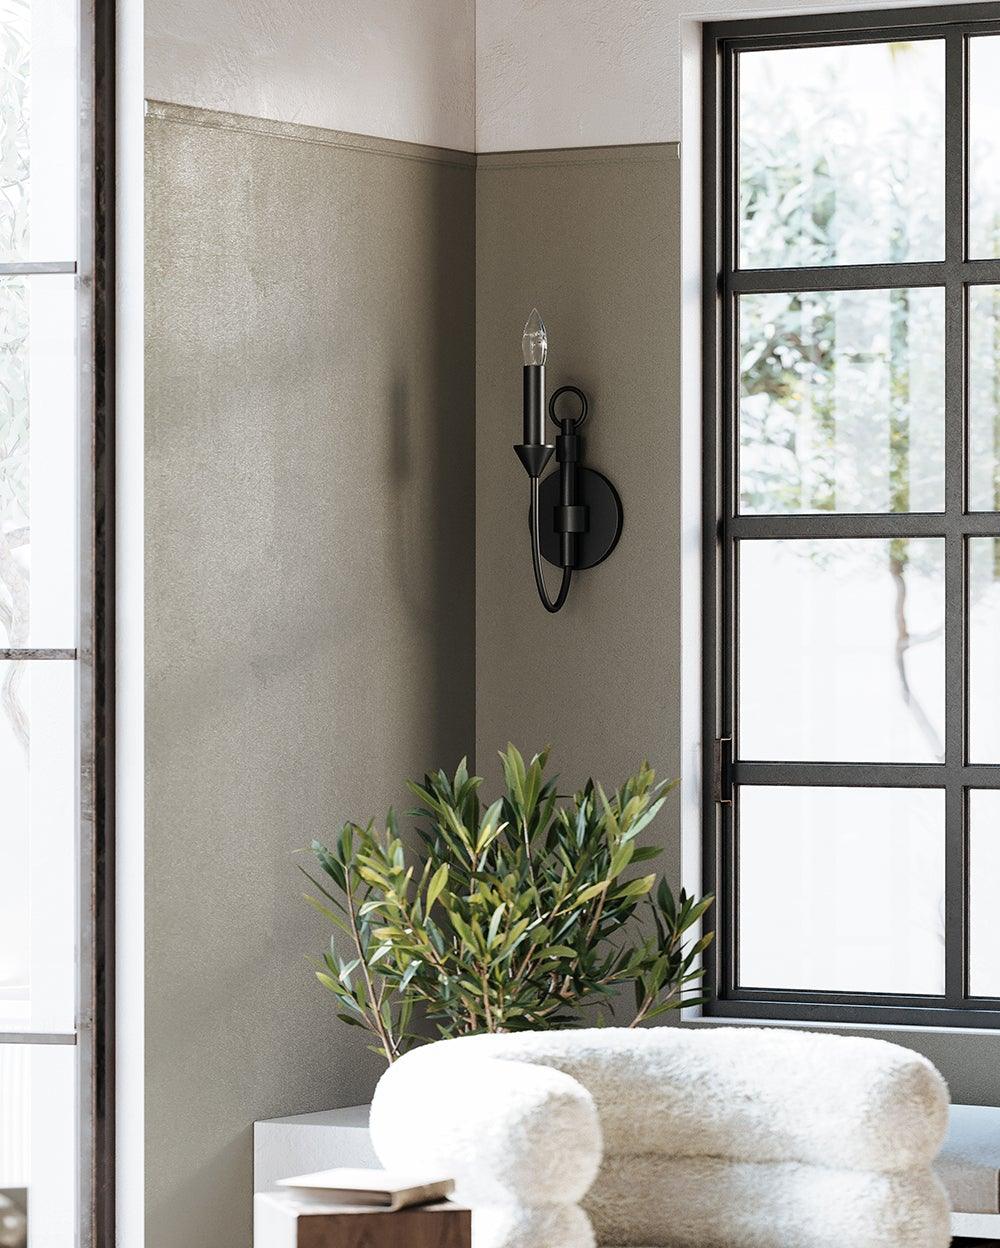 Steel with Arch Arm Single Light Wall Sconce - LV LIGHTING